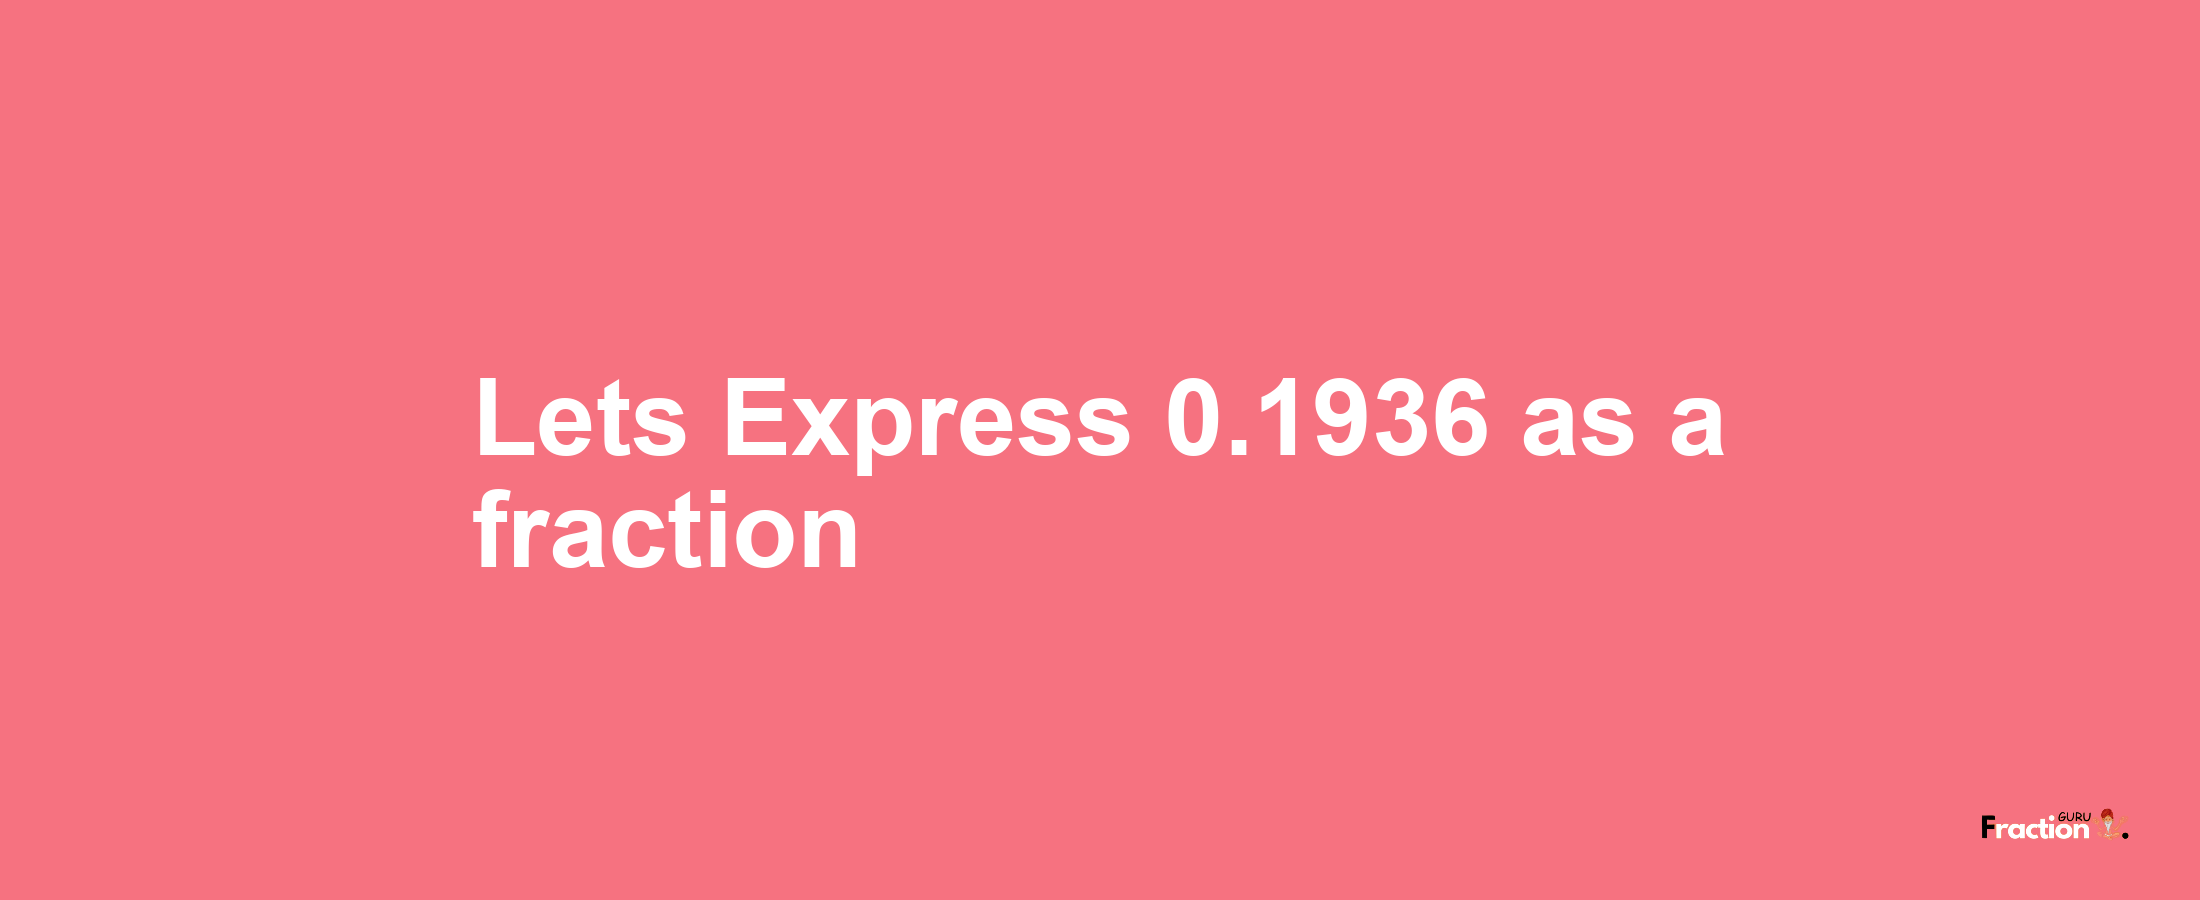 Lets Express 0.1936 as afraction